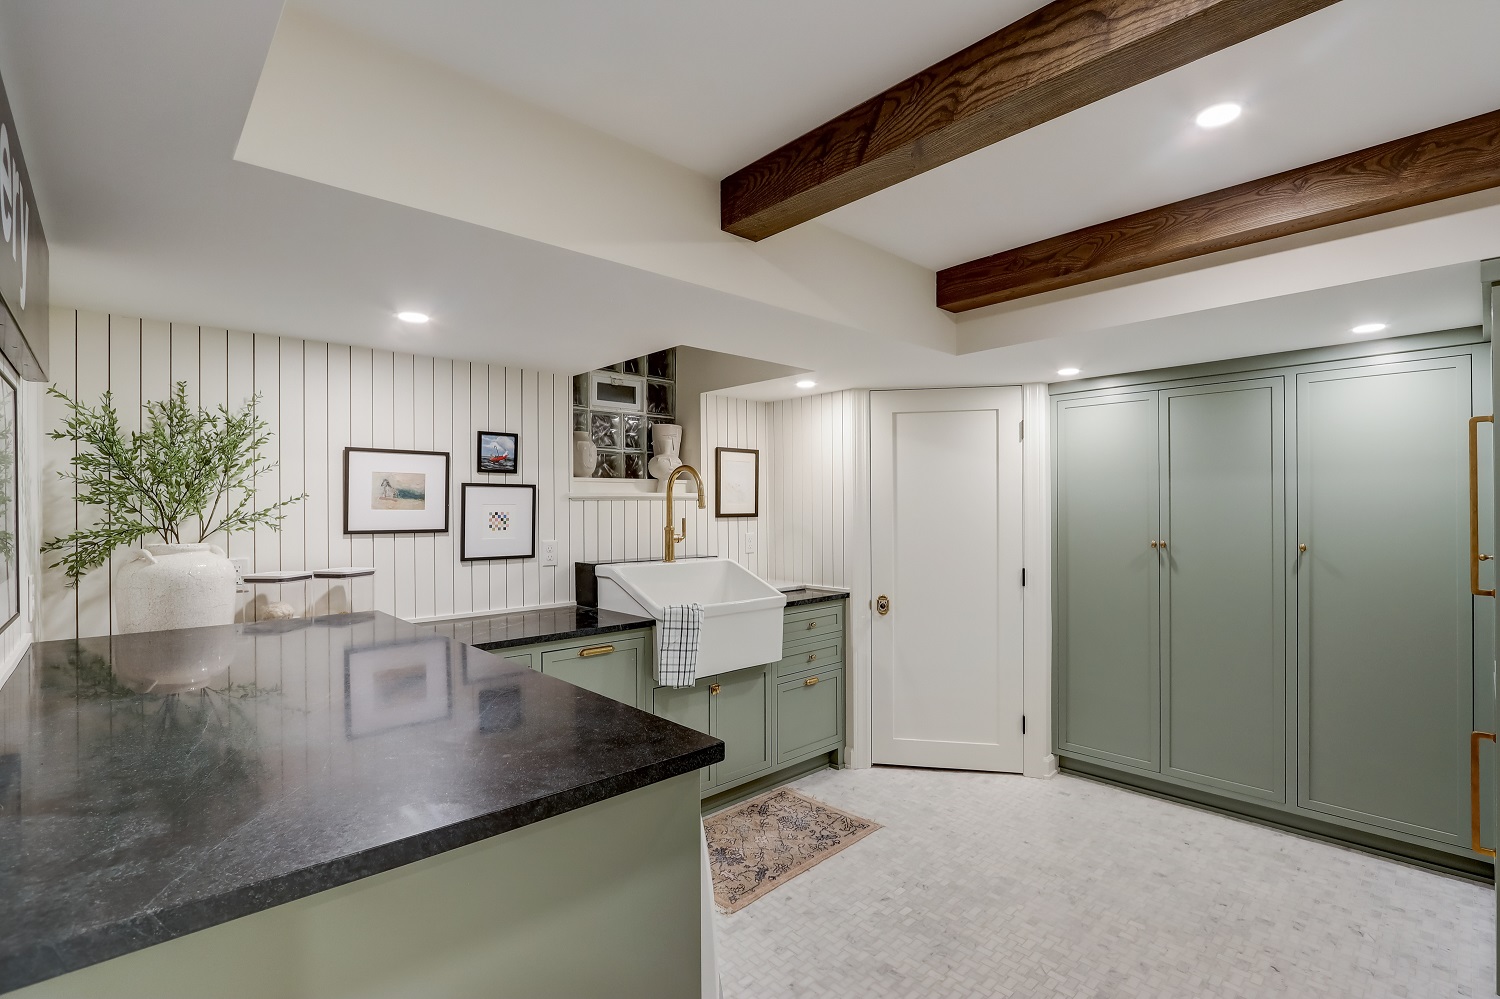 Whitefish Bay Basement Remodeling Contractors